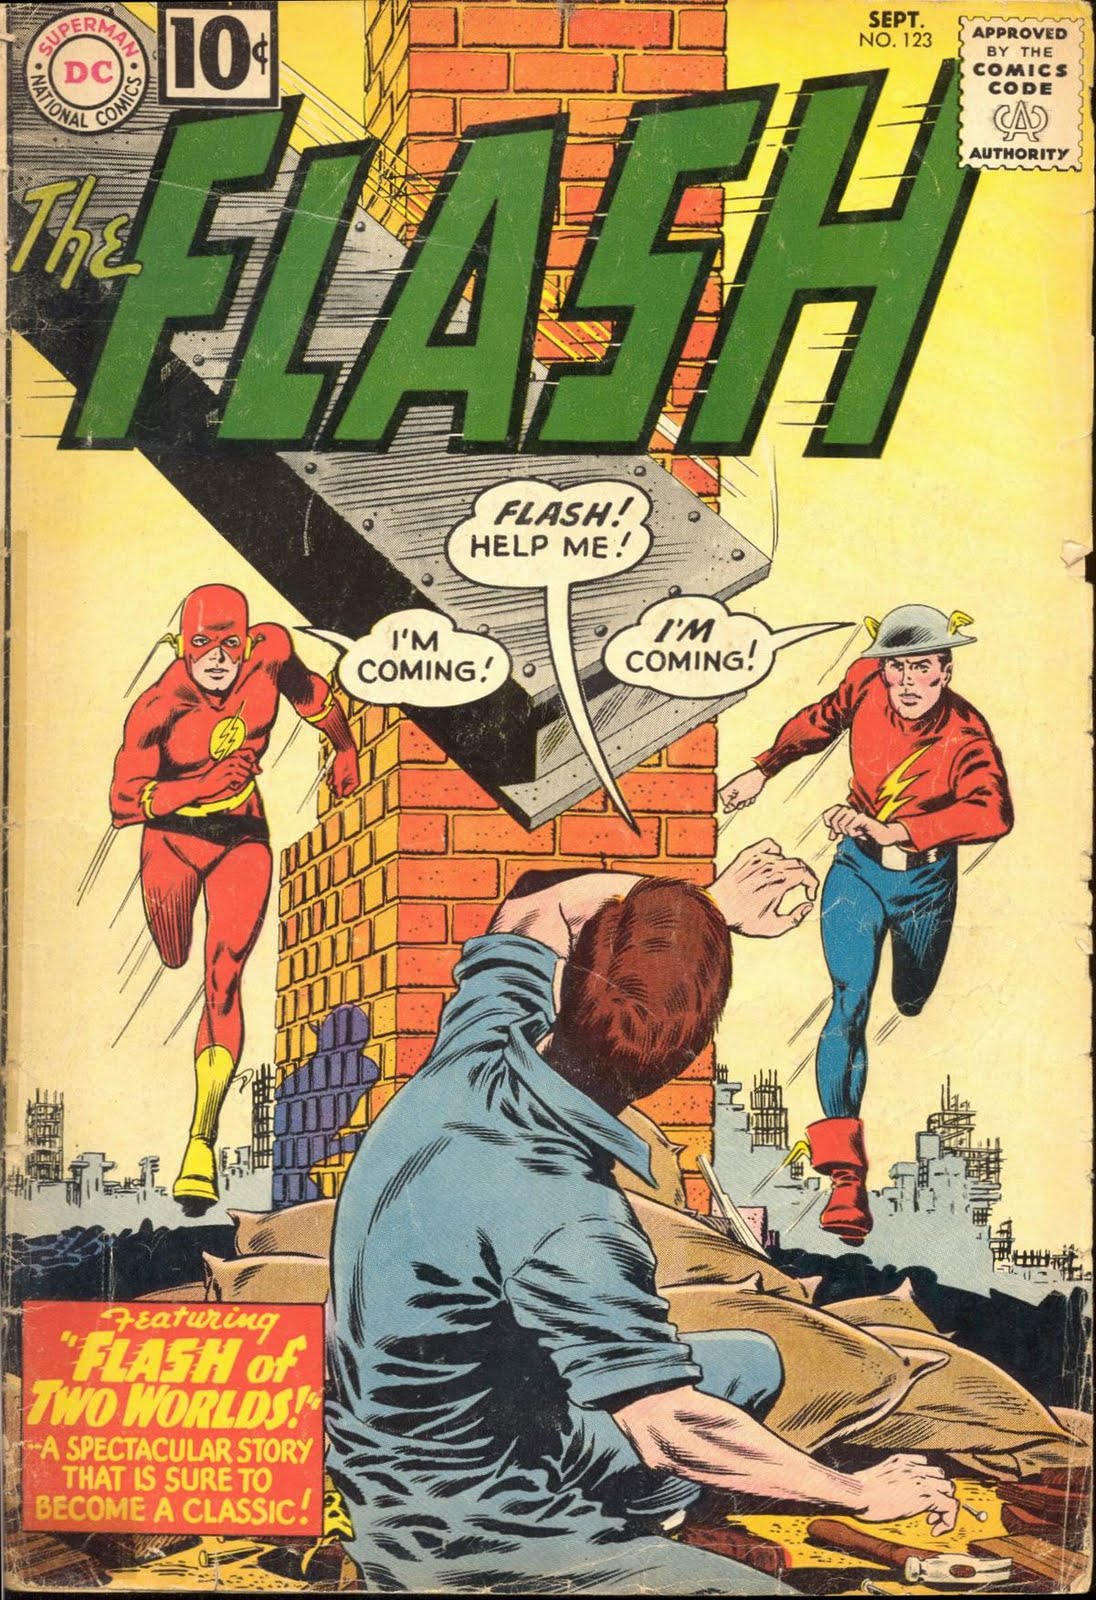 Silver Age Comics Fifty Years Ago This Month